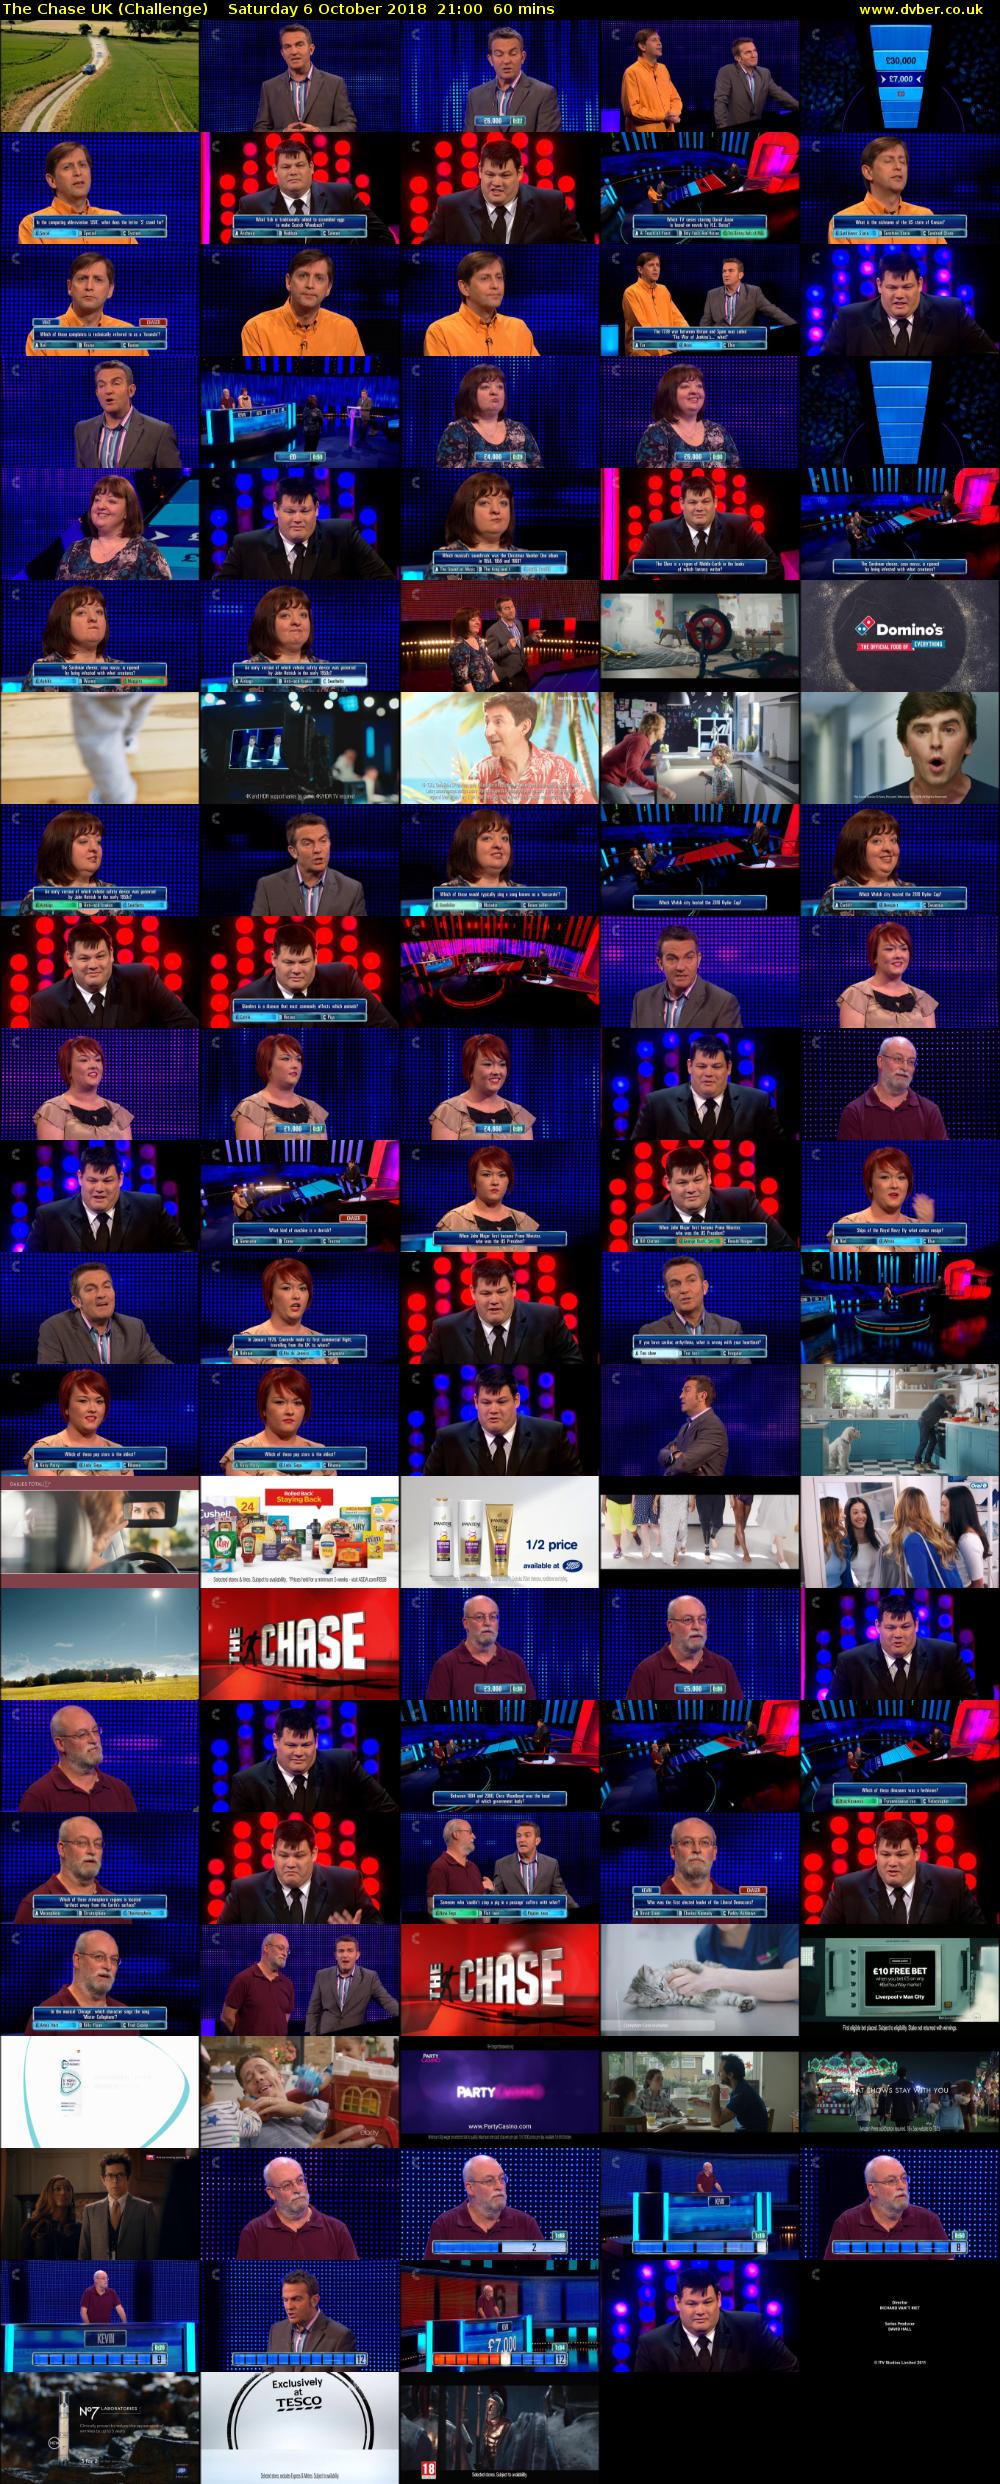 The Chase UK (Challenge) Saturday 6 October 2018 21:00 - 22:00